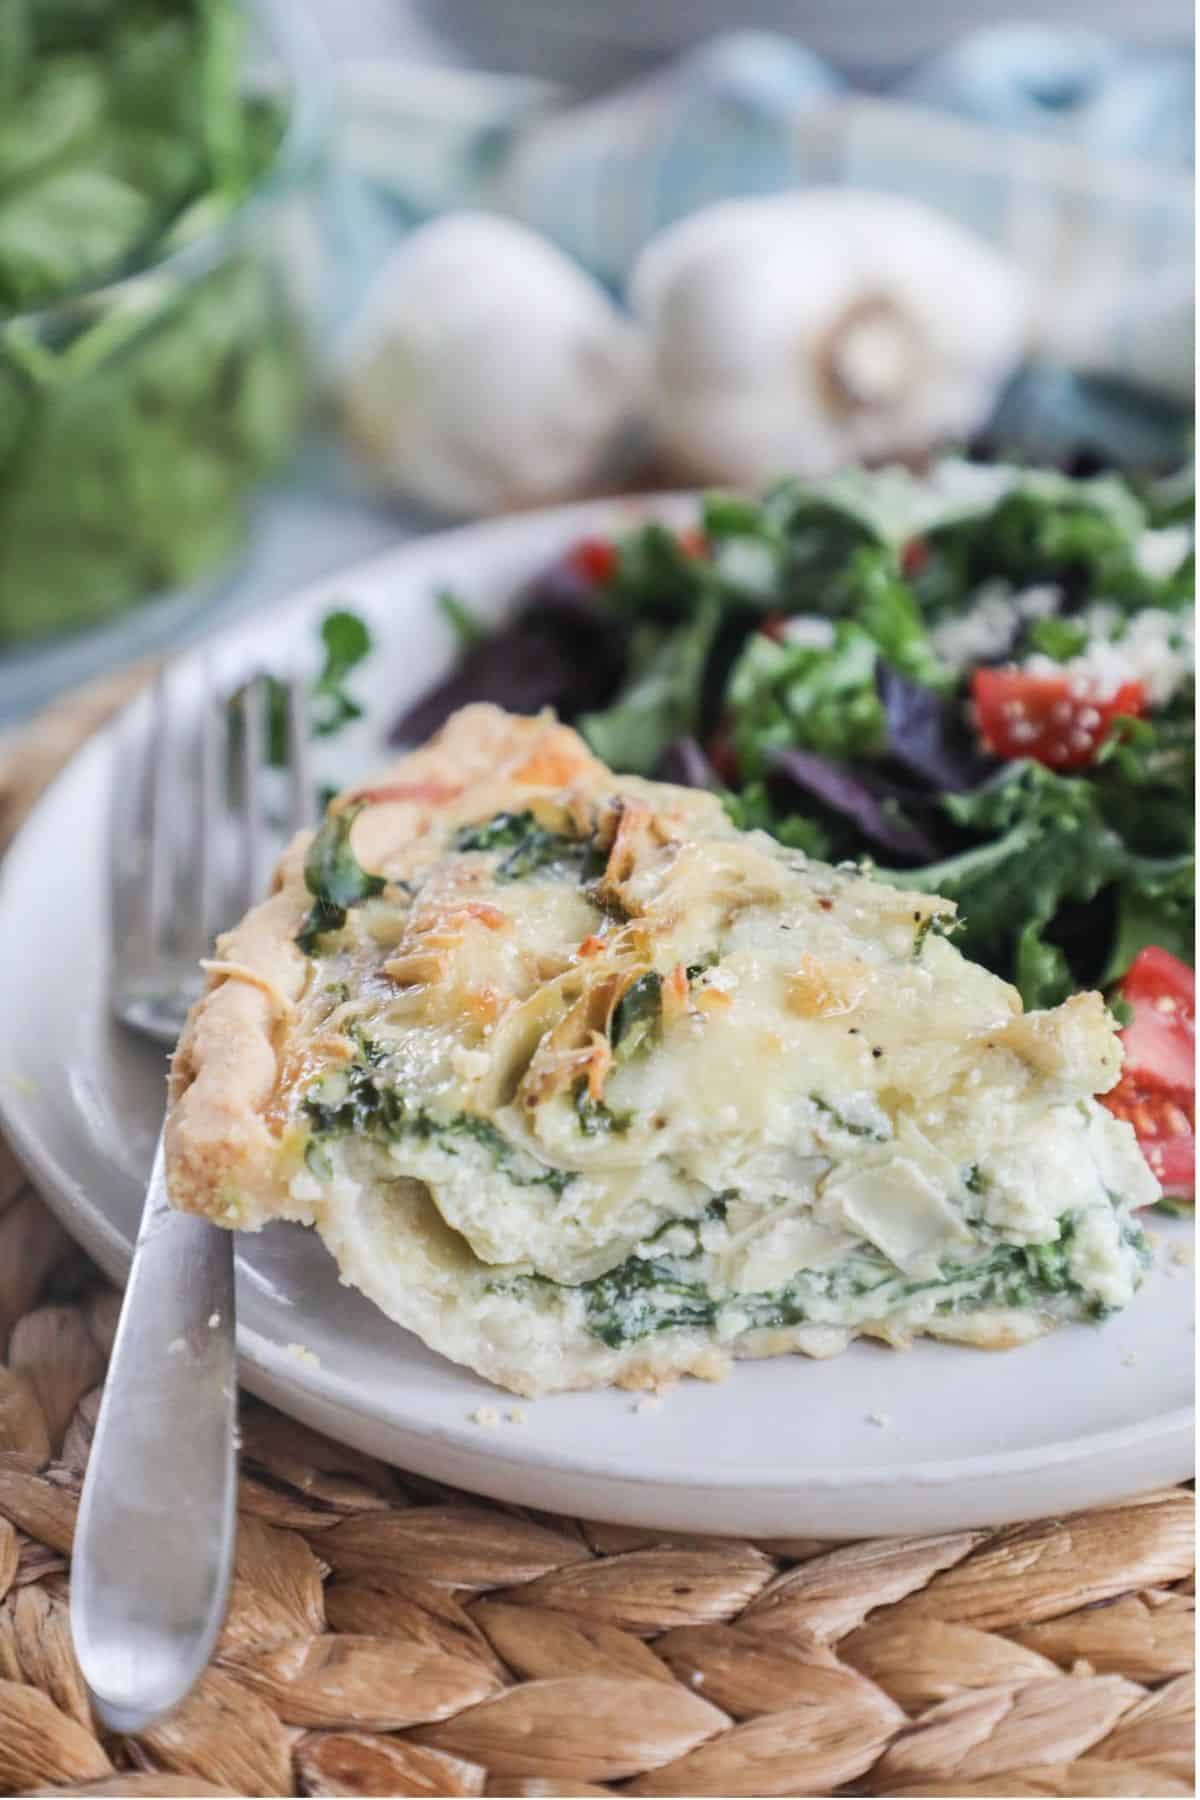 slice of spinach artichoke quiche on a plate with a side salad